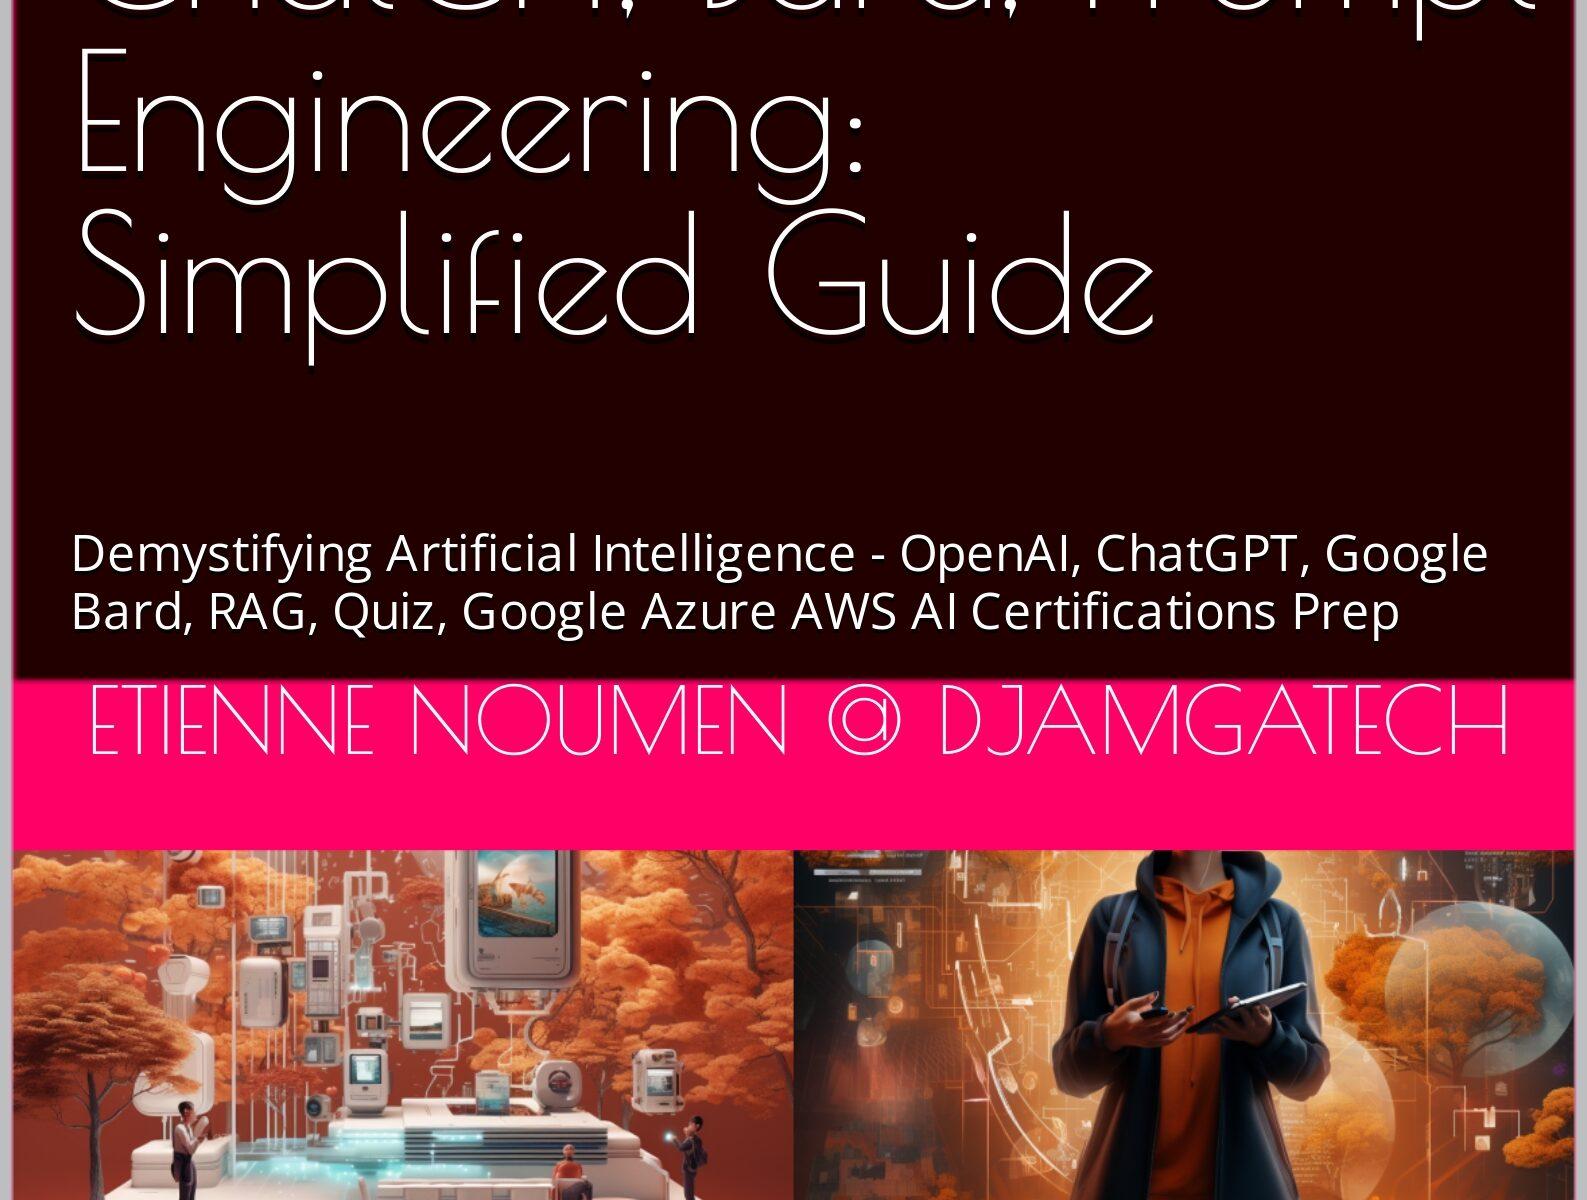 AI Unraveled: Master GPT-4, Gemini, Generative AI, LLMs, Prompt Engineering: A simplified Guide For Everyday Users: OpenAI, ChatGPT, Google Bard, Generative AI, Large Language Models (LLMs), Palm, Llama, Gemini, Deepmind, Explainable AI (XAI), Discriminative AI, AI Ethics, Machine Learning, Reinforcement Learning, Natural Language Processing, Neural networks, Intelligent agents, GPUs, Q*, Master Prompt Engineering, Pass AI Certifications